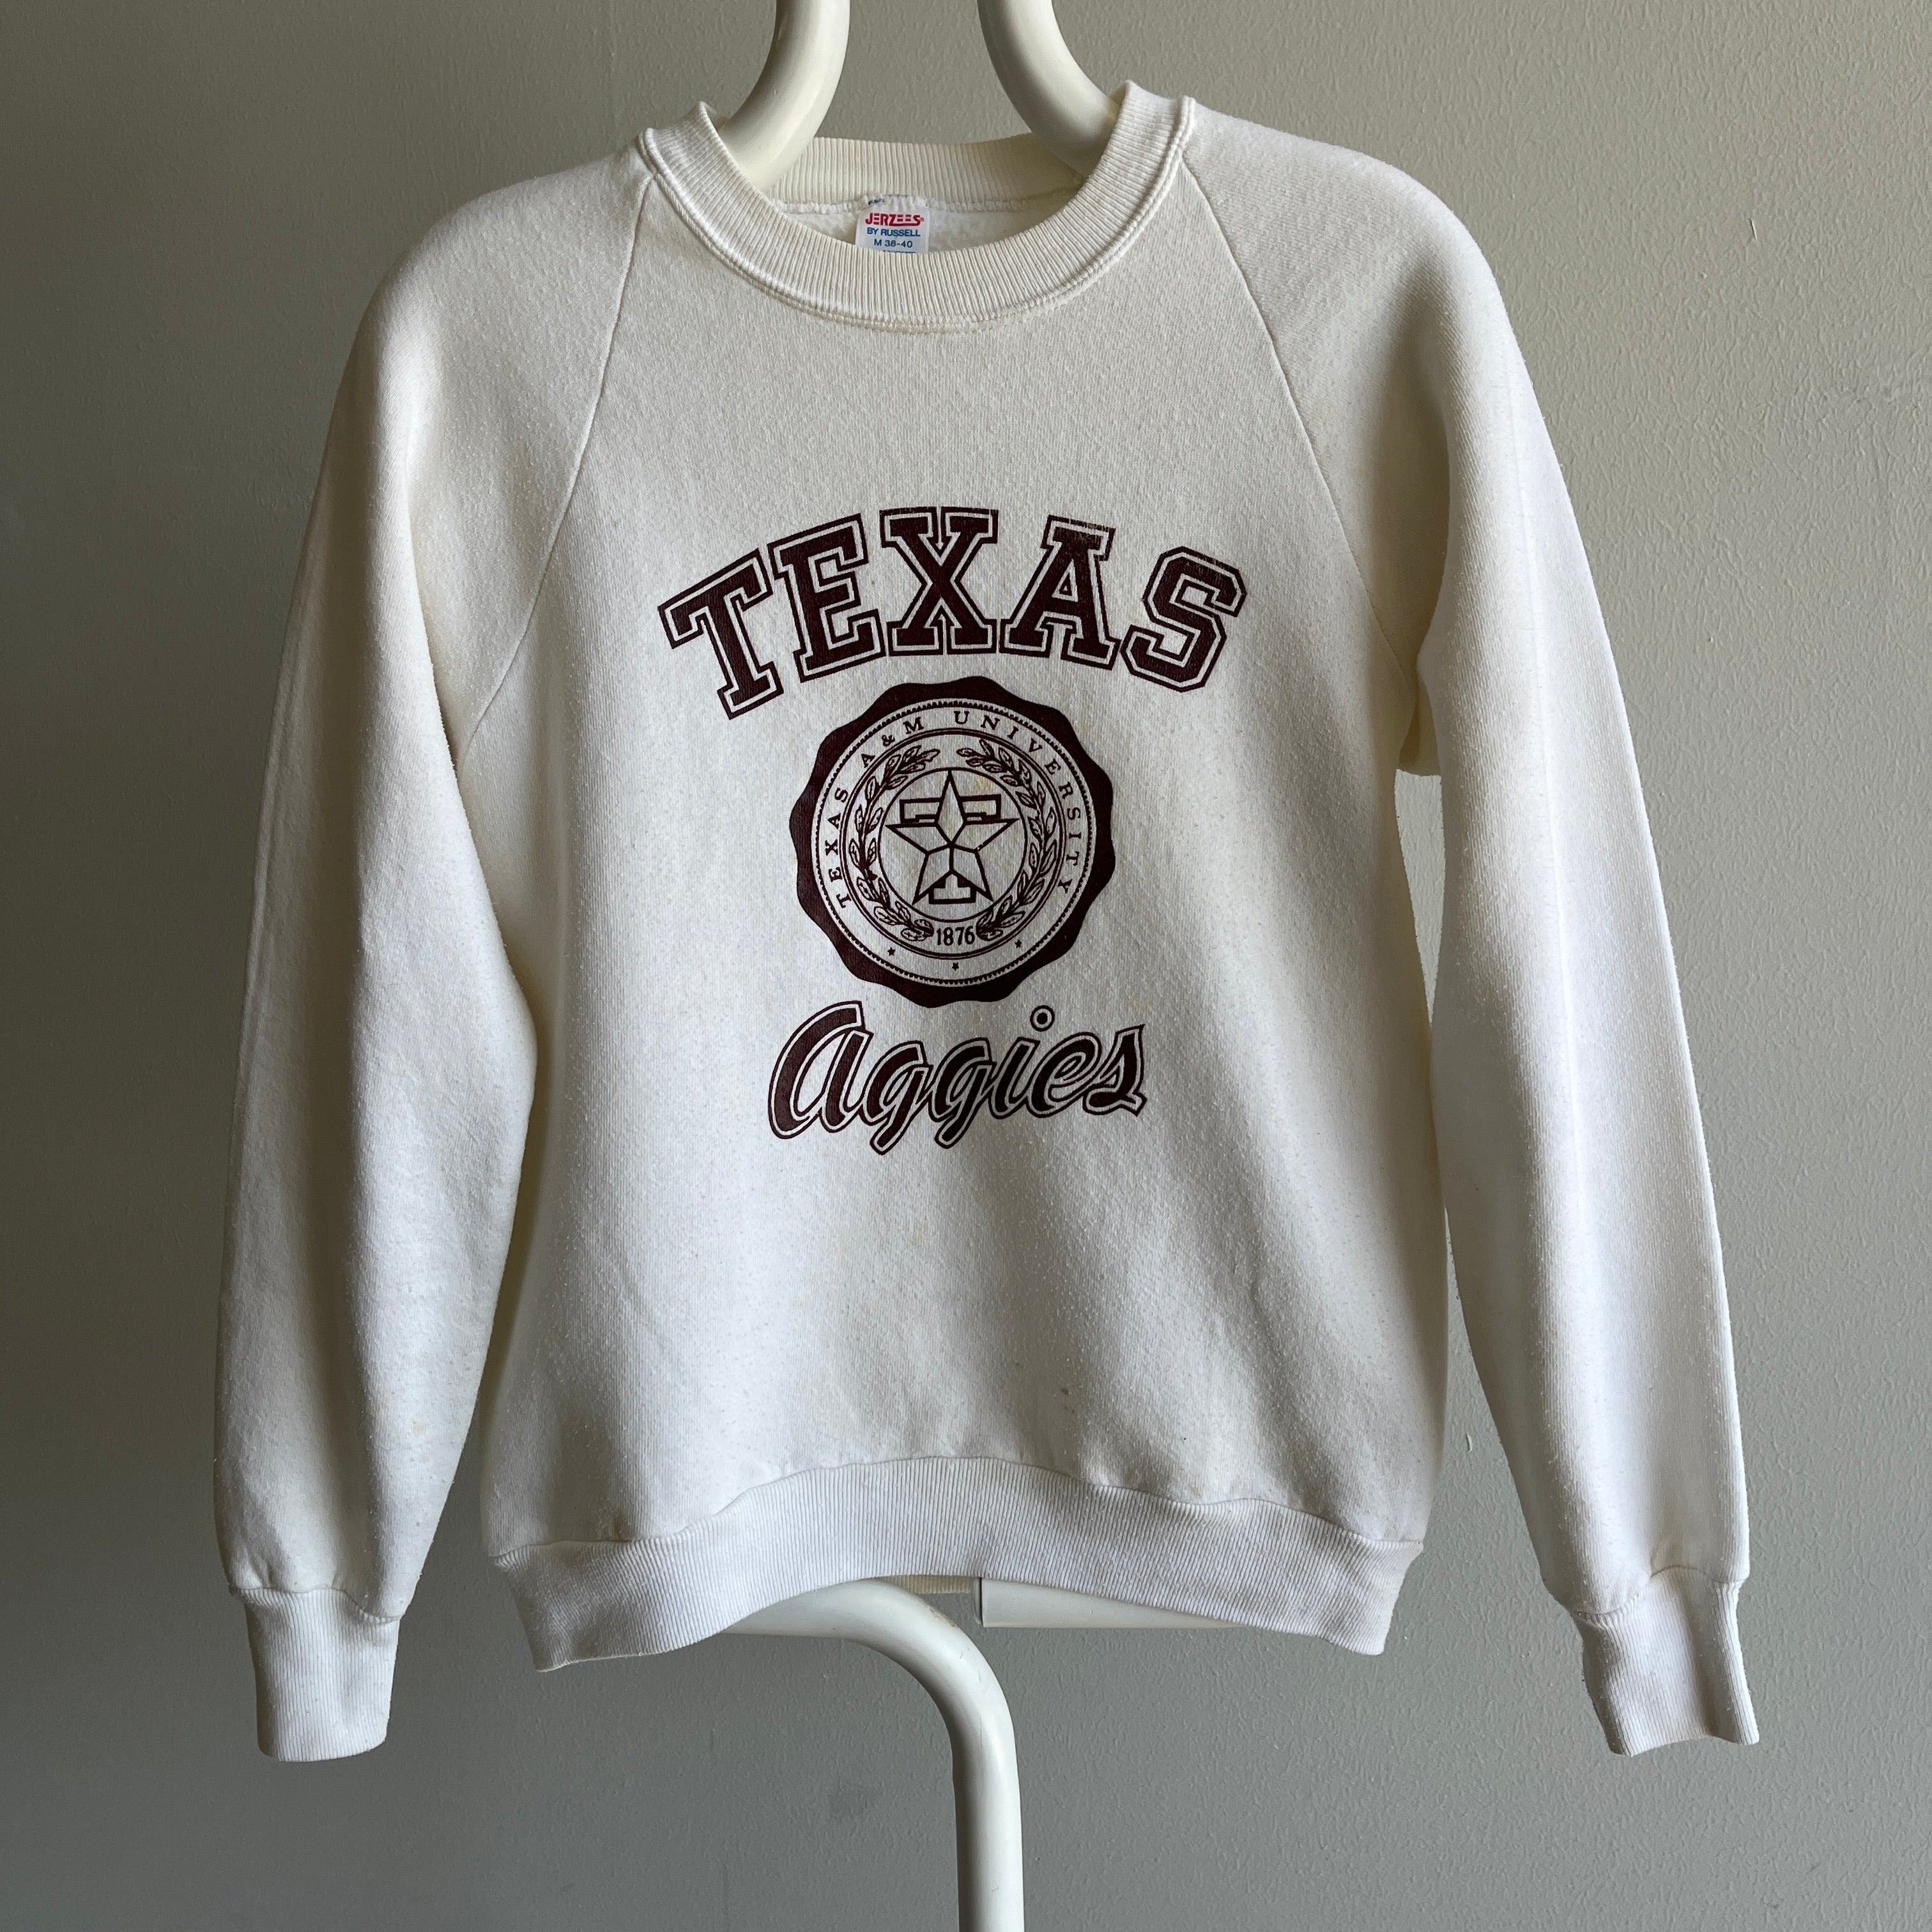 1980s Texas A&M Sweatshirt - Stained